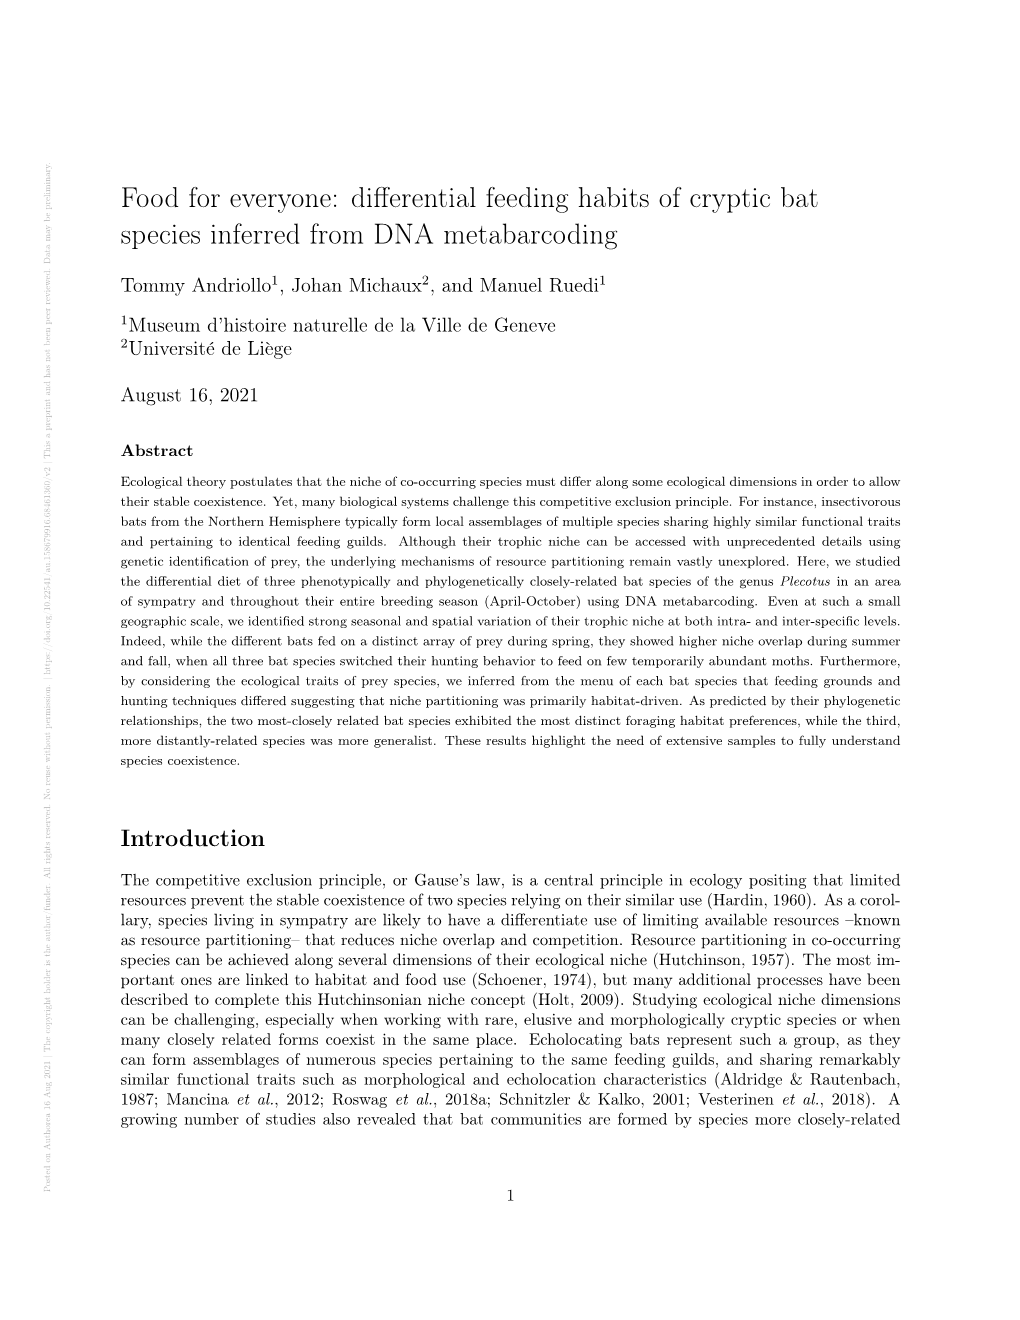 Differential Feeding Habits of Cryptic Bat Species Inferred From